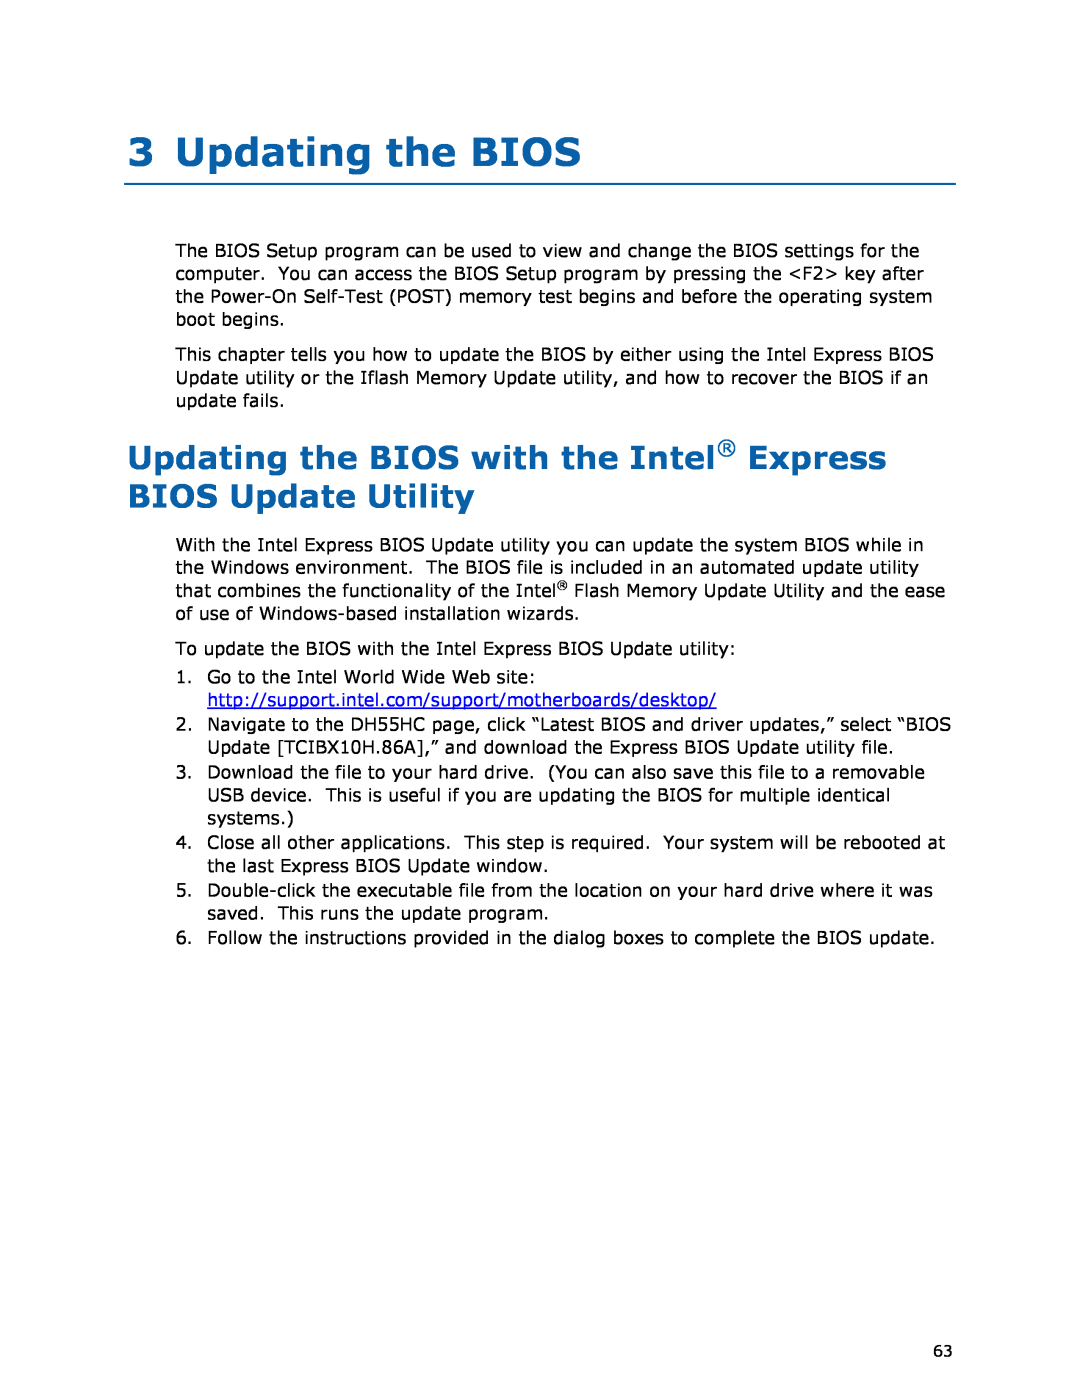 Intel BOXDH55HC manual Updating the BIOS with the Intel Express BIOS Update Utility 